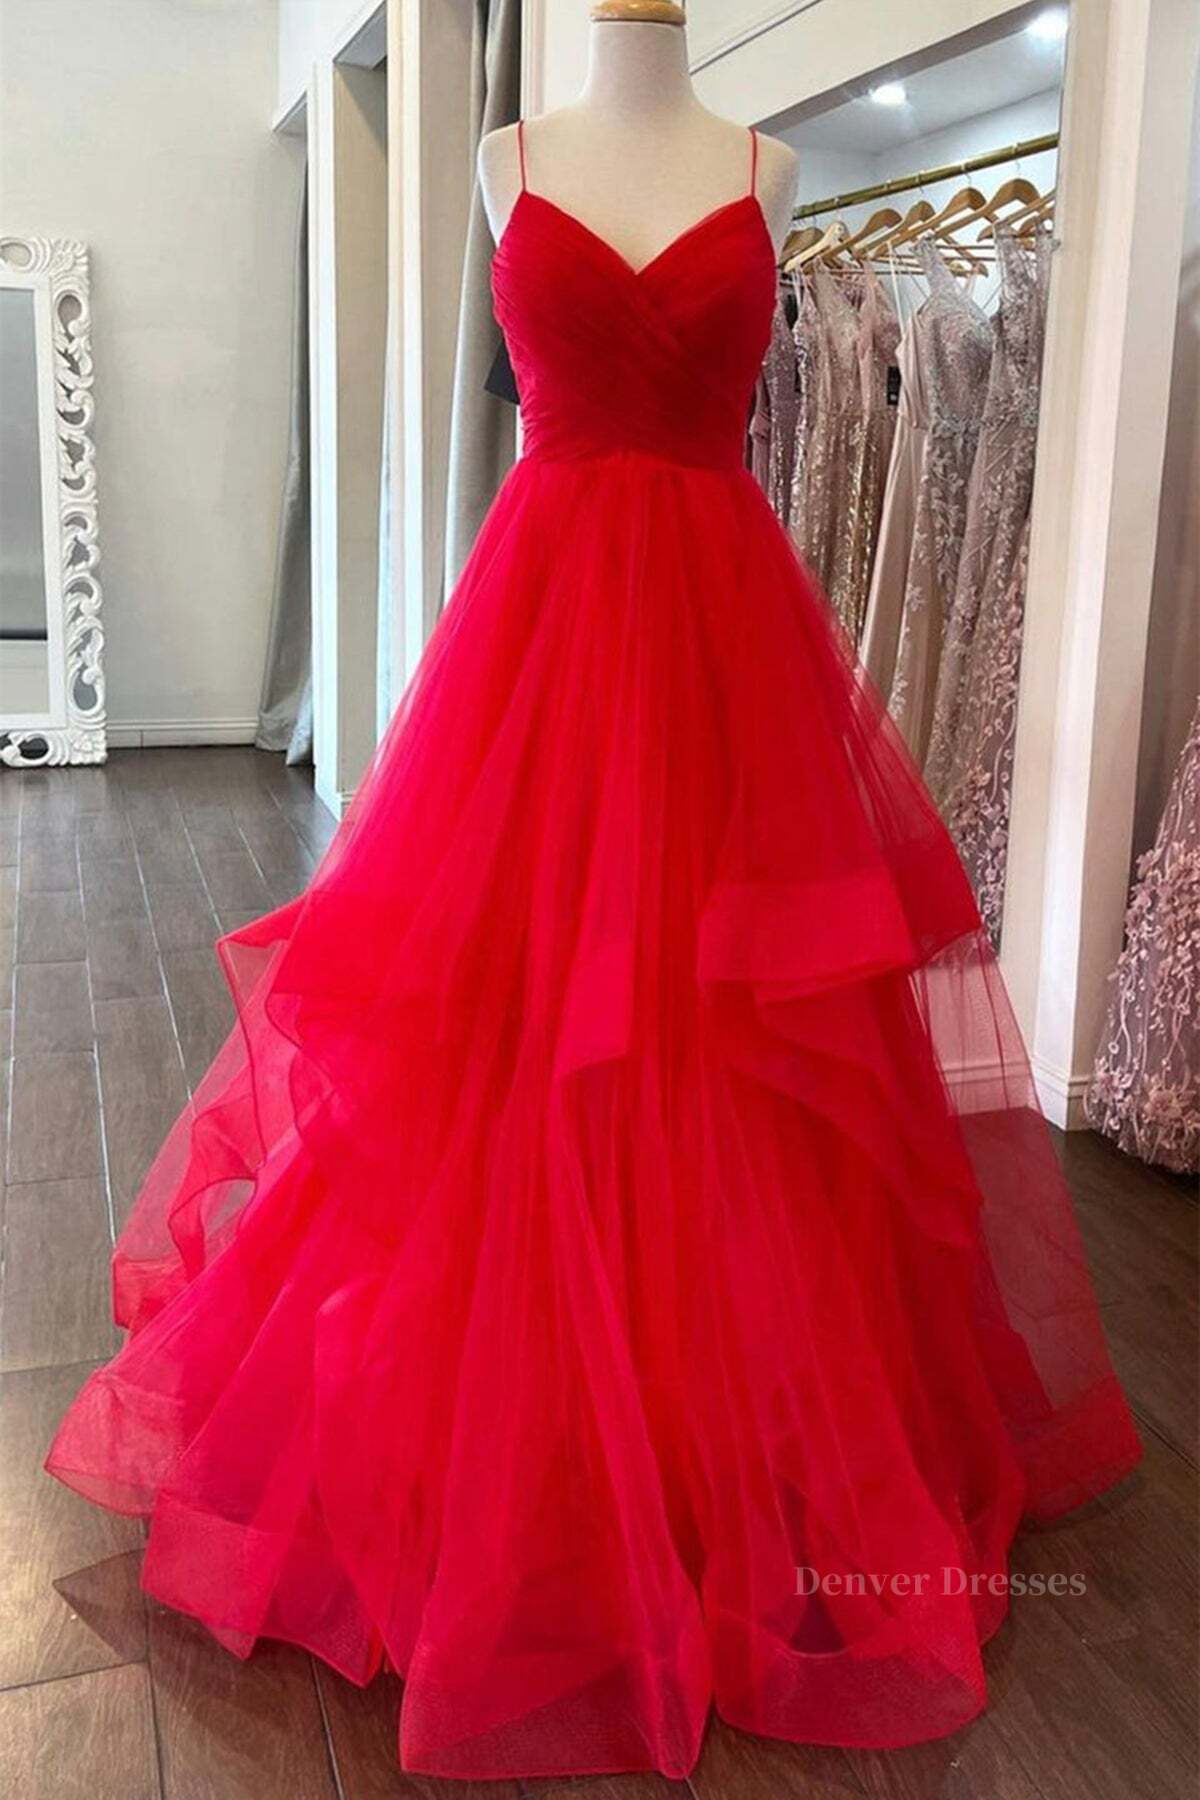 Bridesmaids Dresses Styles, Puffy Red Tulle V Neck Long Prom Dresses, V Neck Red Formal Dresses, Red Evening Dresses